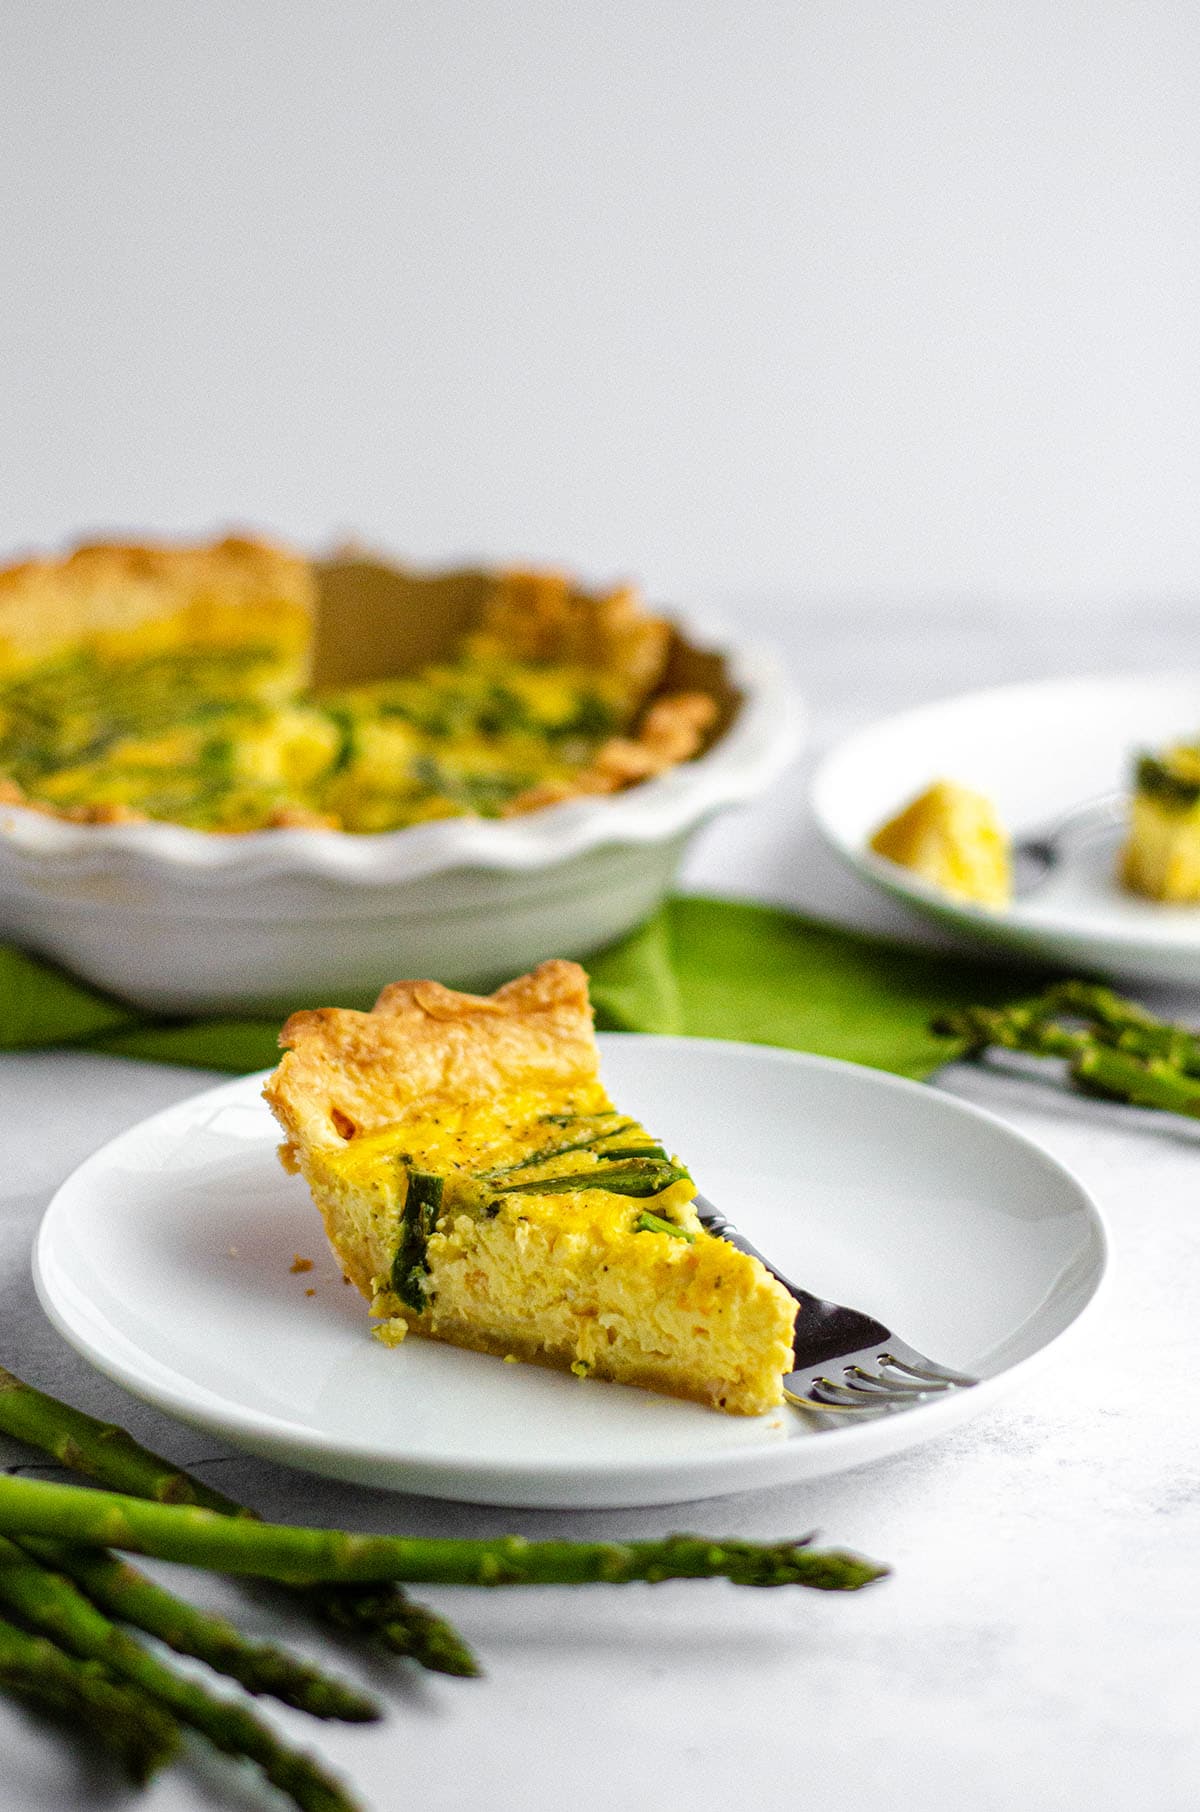 A simple egg quiche loaded up with asparagus and cheese. Pair with my favorite homemade pie crust or go crustless! via @frshaprilflours